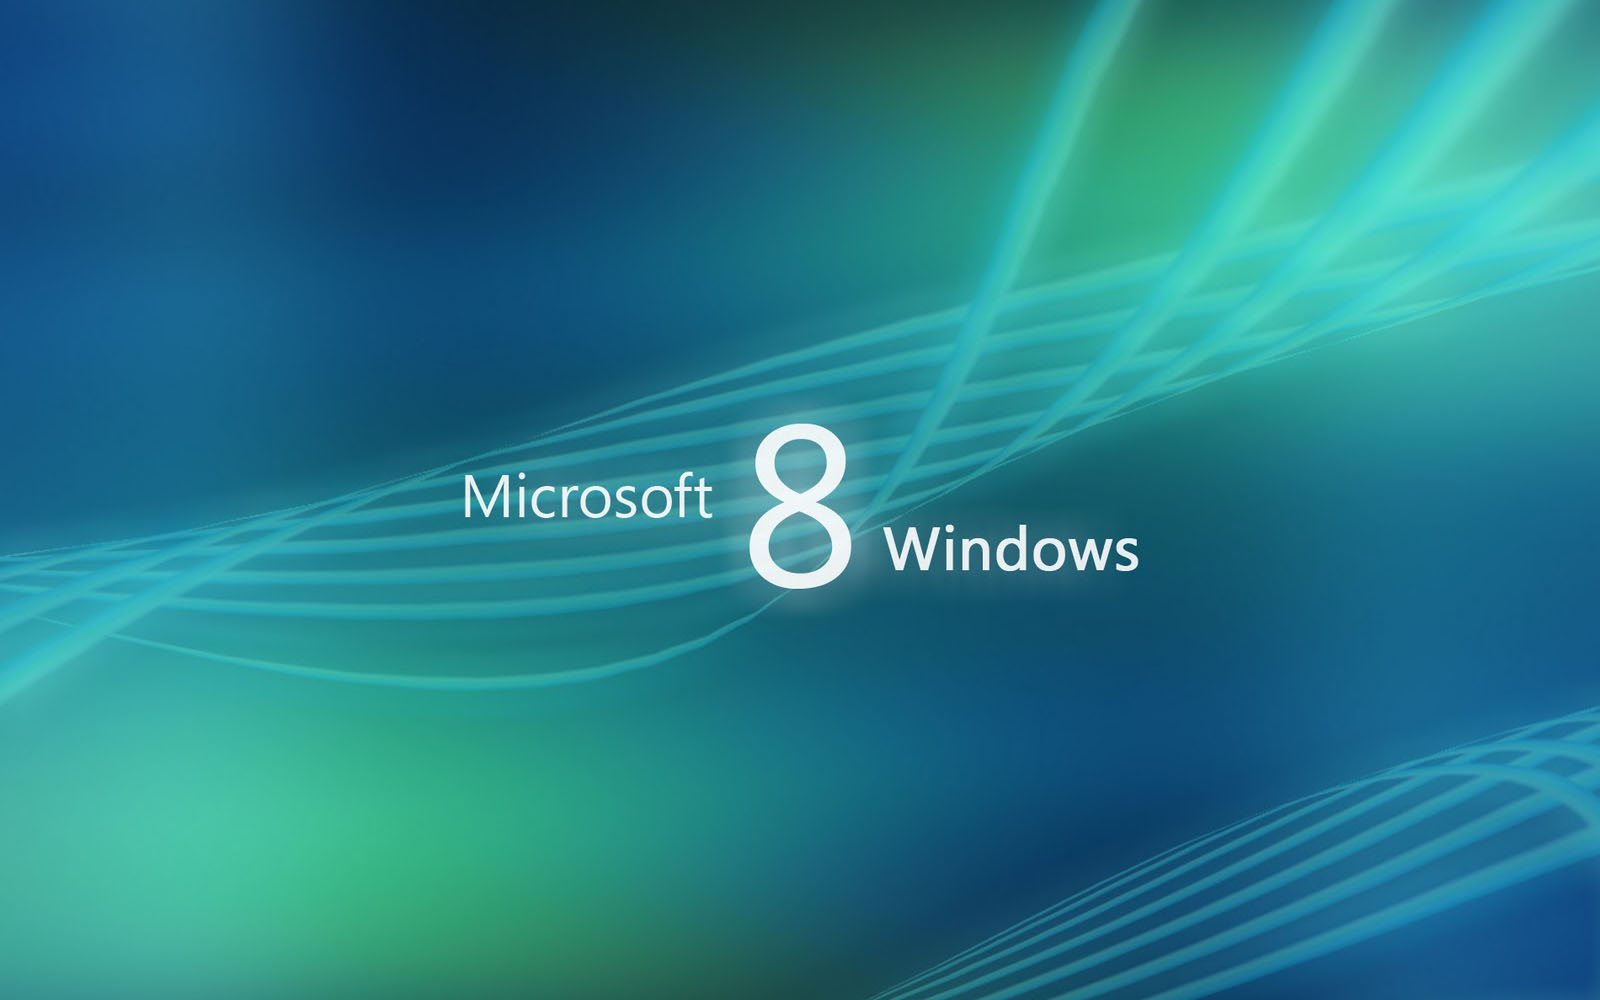  Wallpapers Windows 8 Background Screensavers Top Backgrounds Win 8